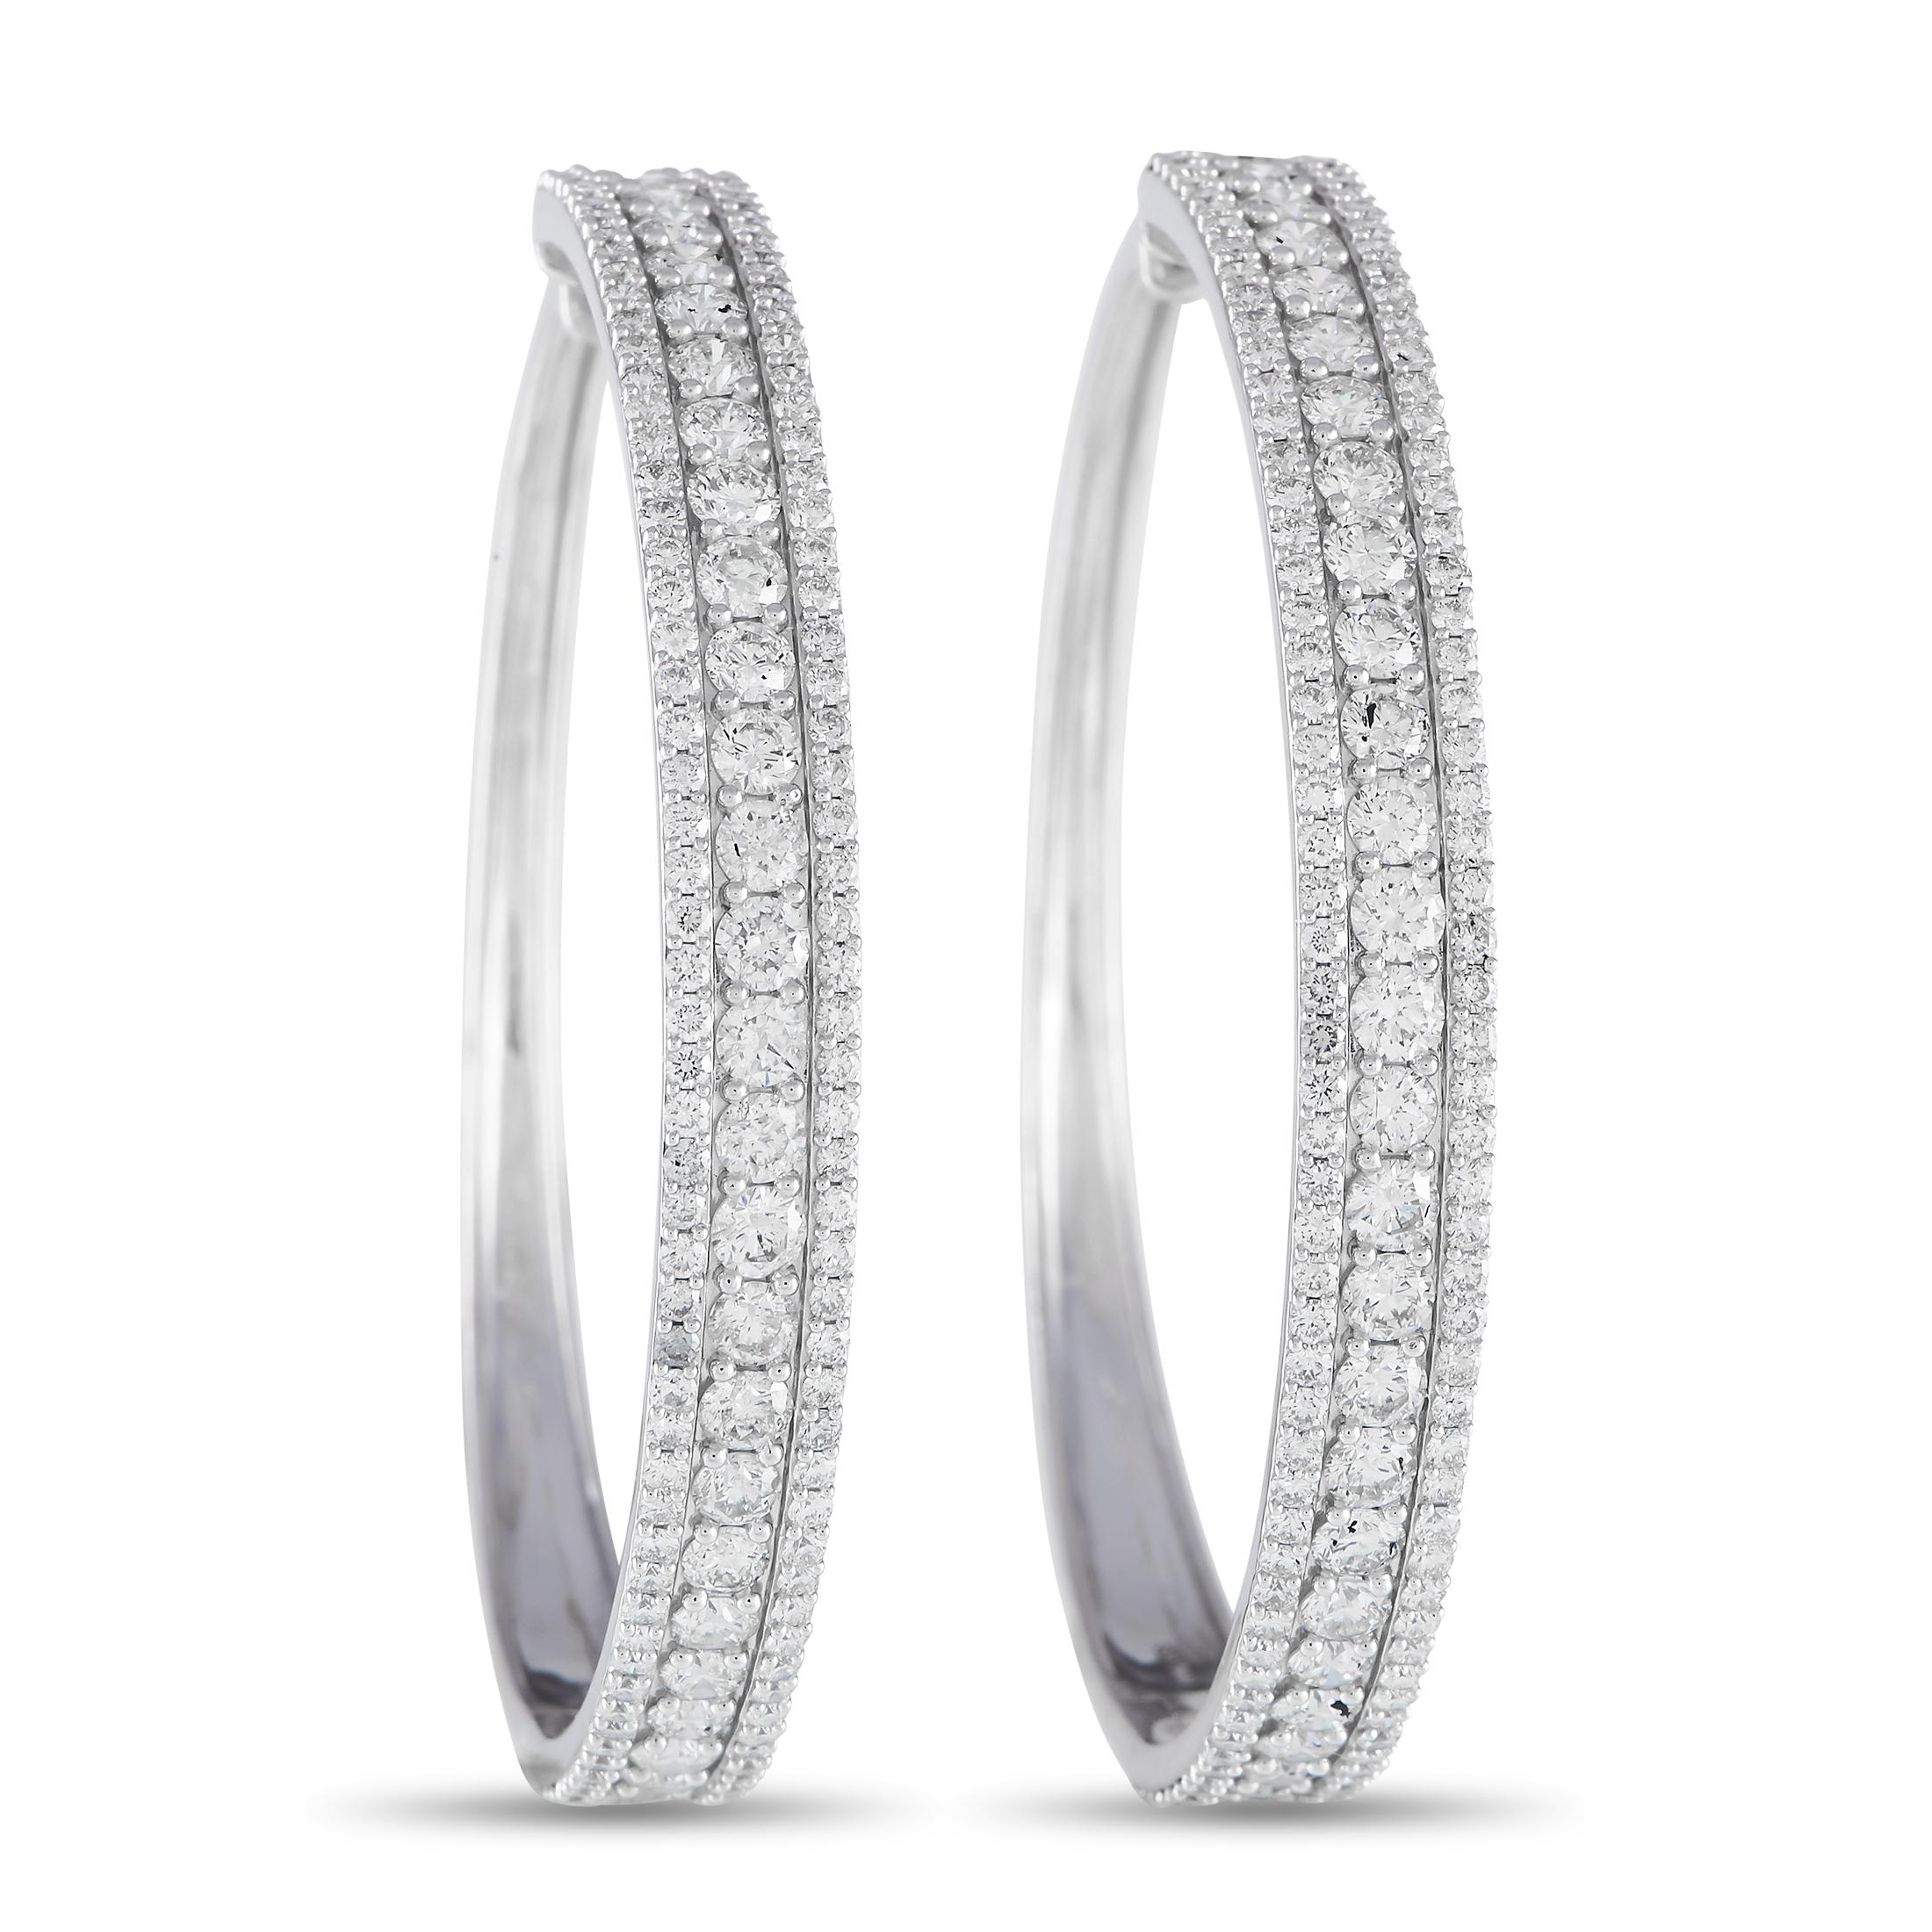 LB Exclusive 14k White Gold 7.0 Carat Diamond Tapered Hoop Earrings In New Condition For Sale In Southampton, PA